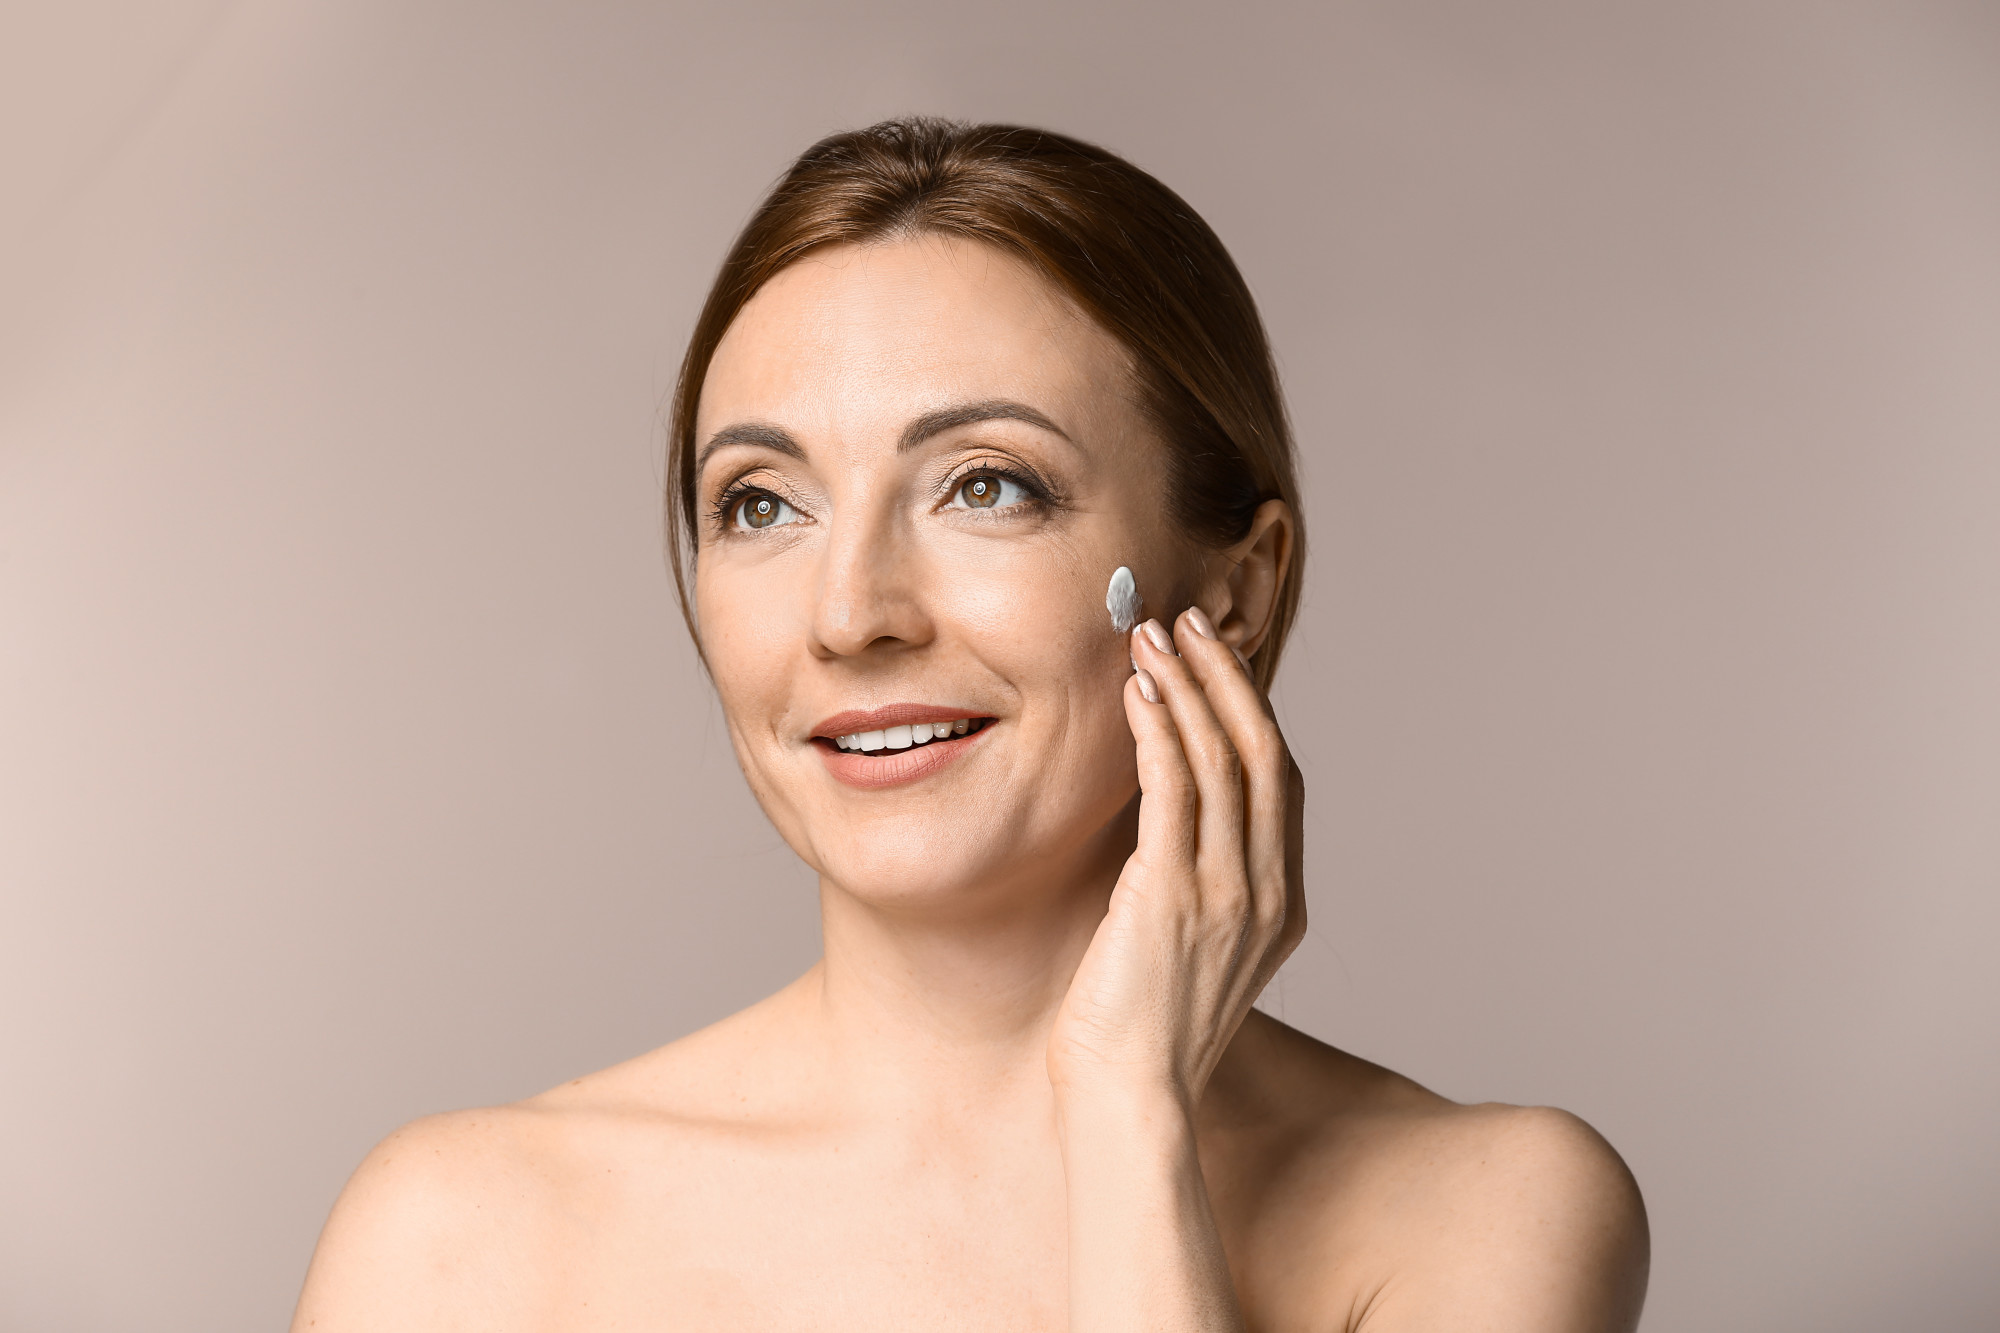 Wrinkle Treatments: How to Choose the Right Option for Your Skin